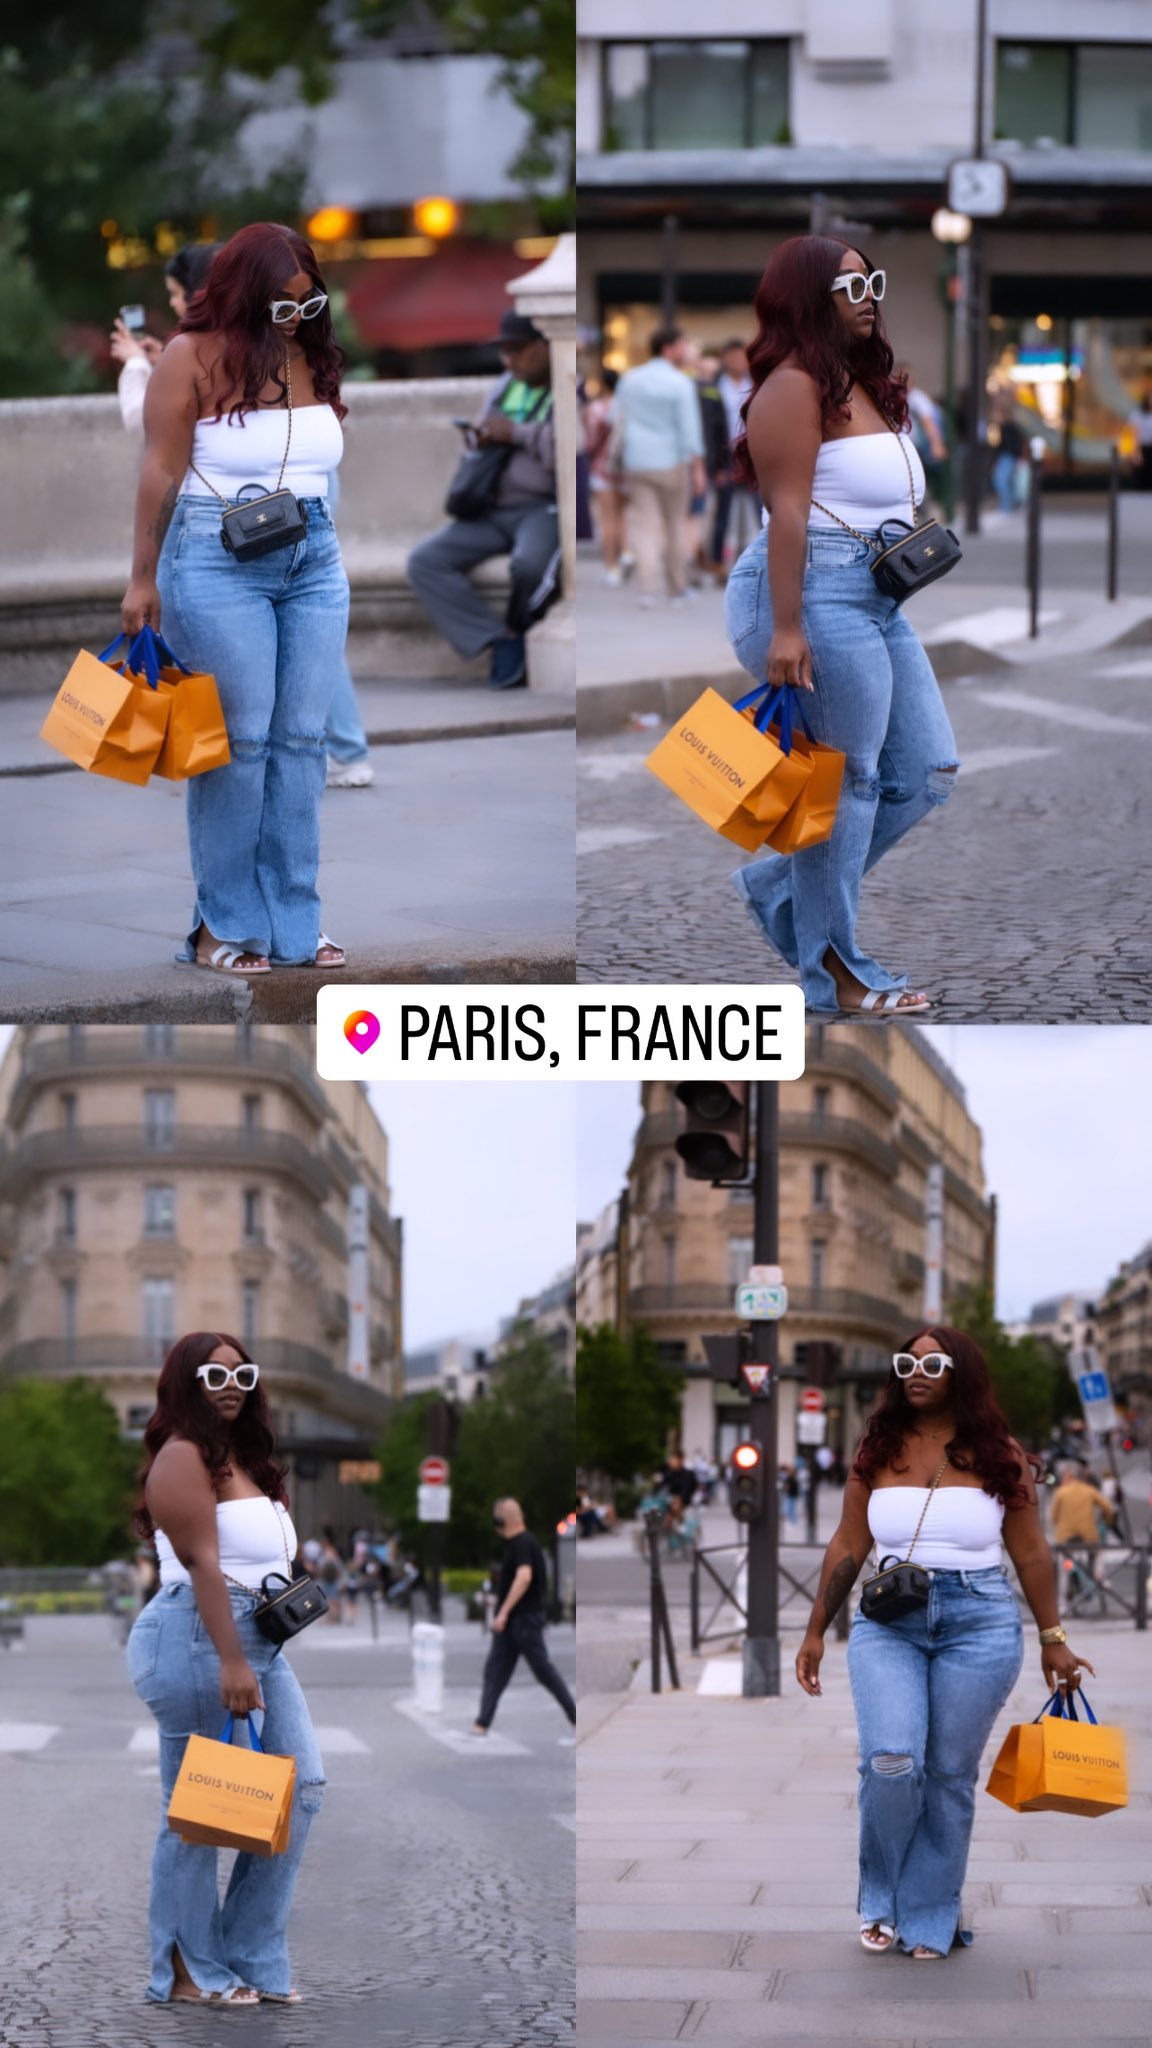 AMG Brie. 💎✨ on X: When a photographer stops you randomly & makes you  do a whole photoshoot for free 🤣 It's giving Paris street style fashion  😌🤌🏾 #ParisBrie 🇫🇷✨  